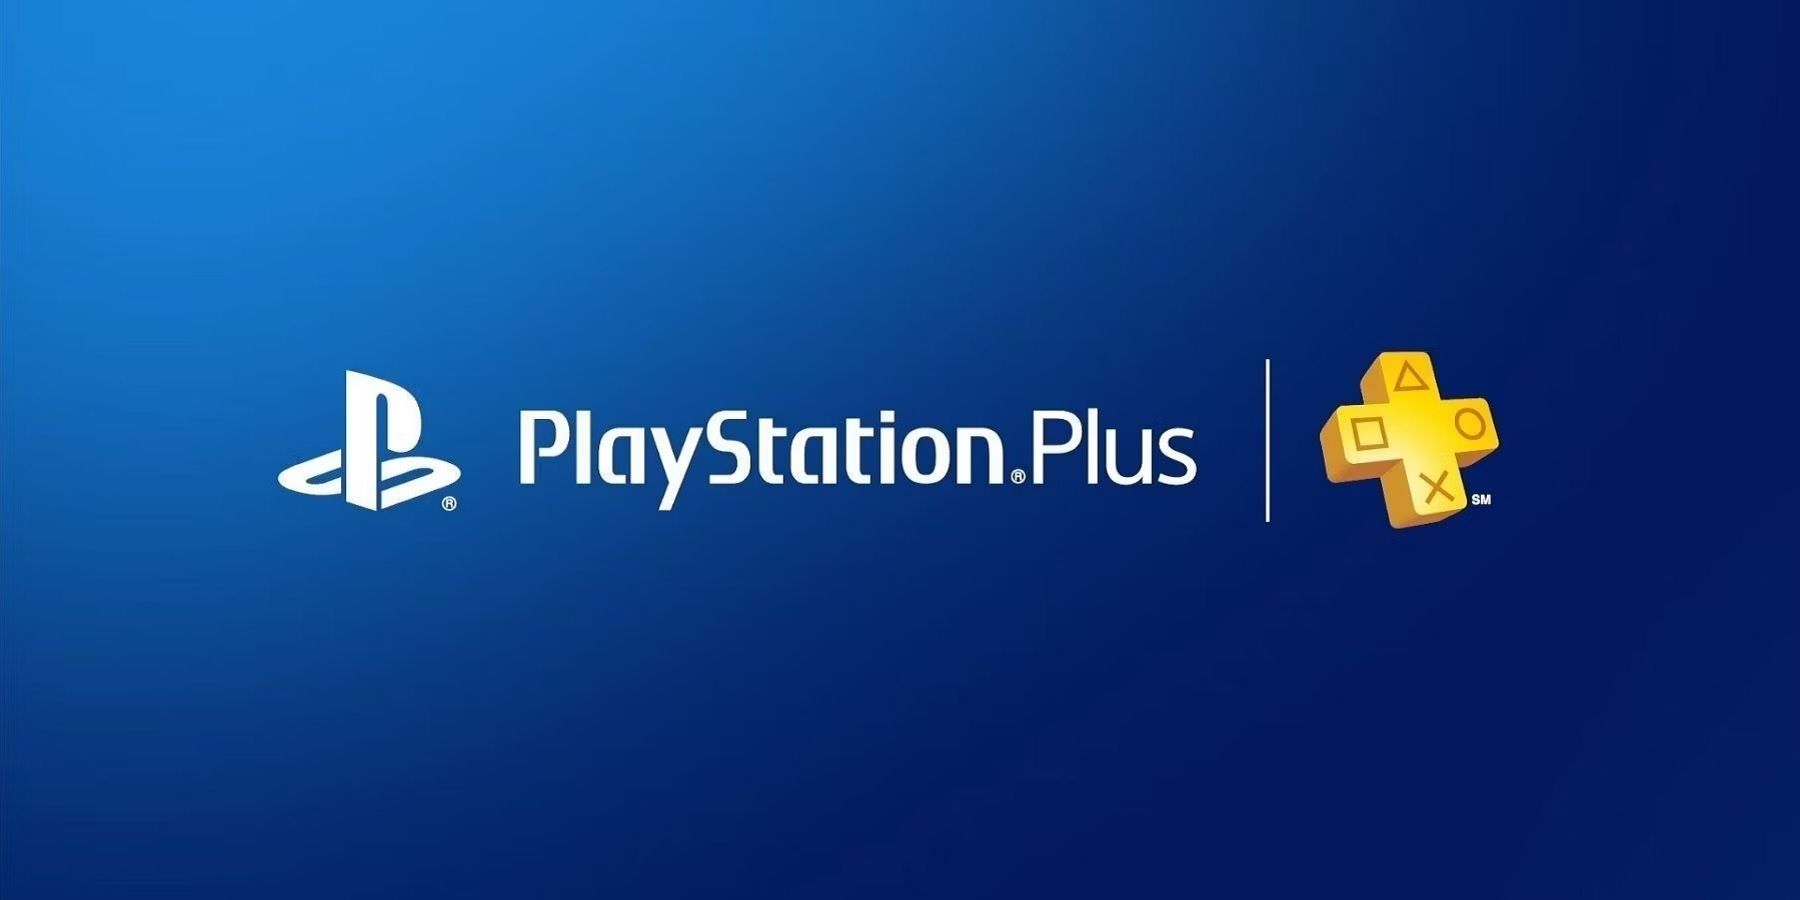 PlayStation - Your PlayStation Plus Monthly Games for September are: ➕  Saints Row ➕ Black Desert - Traveler Edition ➕ Generation Zero Full  details: play.st/3R0PXMr